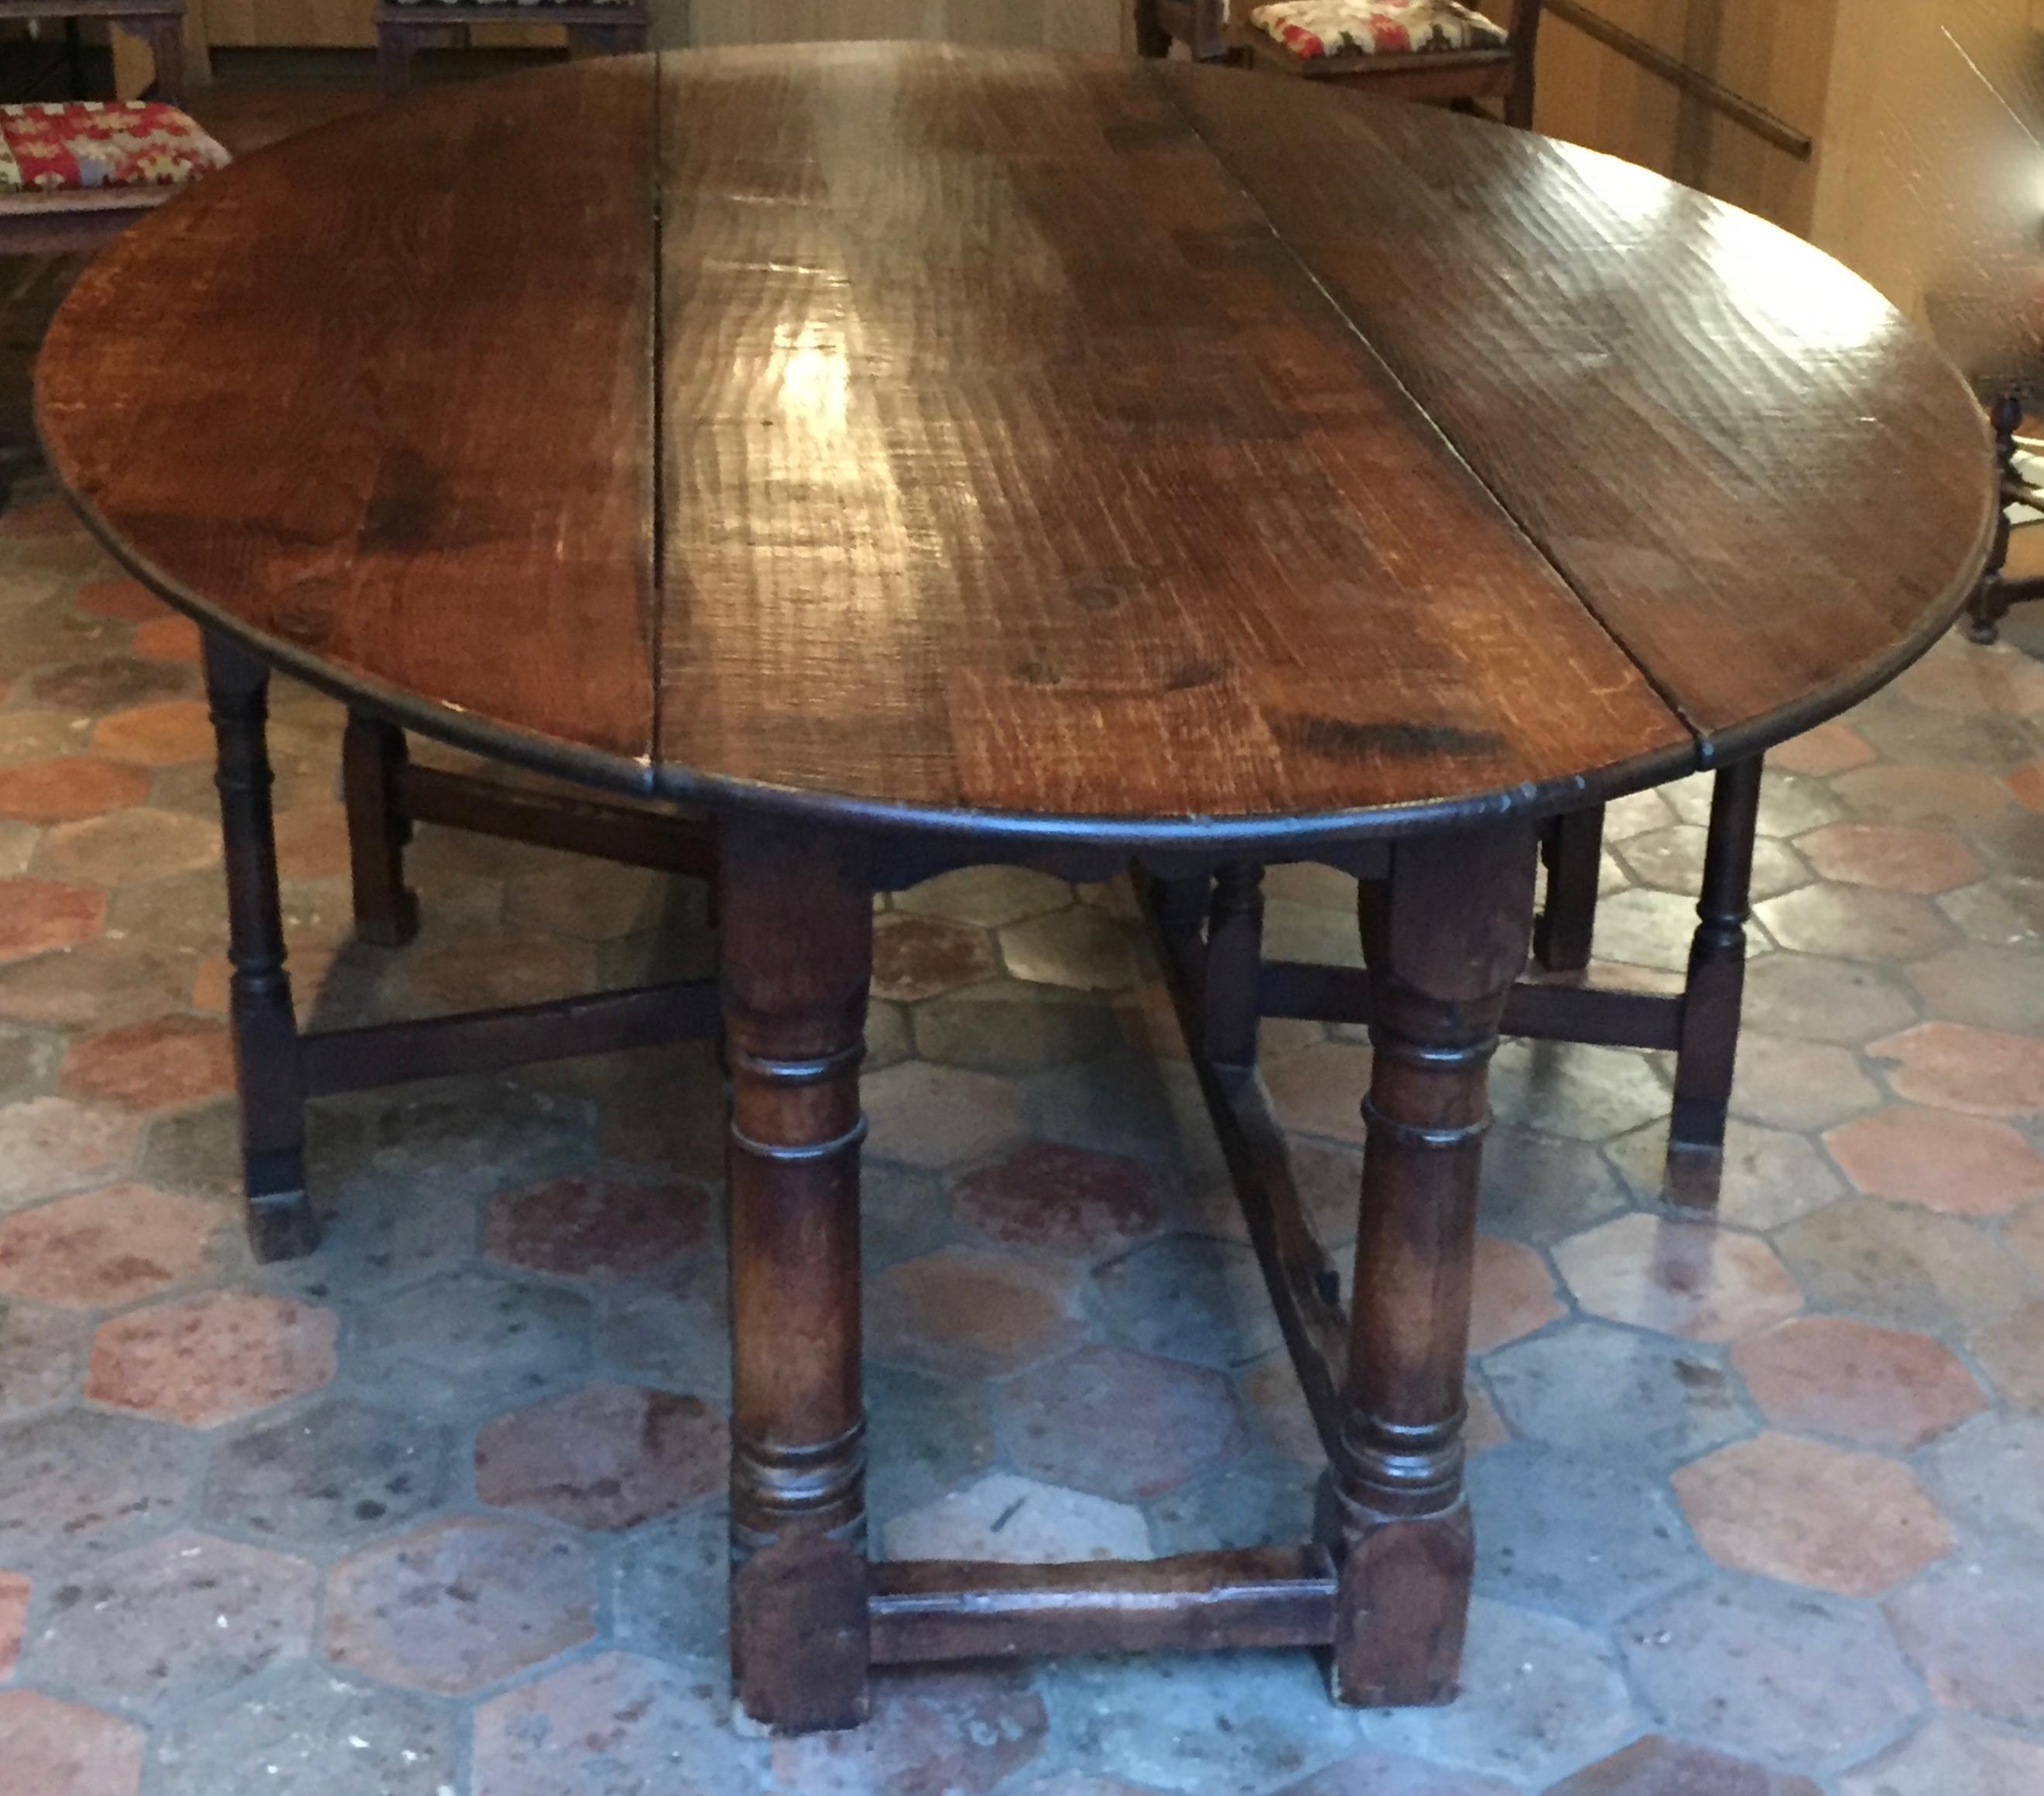 Large 19th century English oak gateleg table dining table. Very versatile double drop leaf table can be used with both leaves up for dining, or use it with one leaf dropped or both leaves dropped behind a sofa.
Strong and sturdy pegged construction